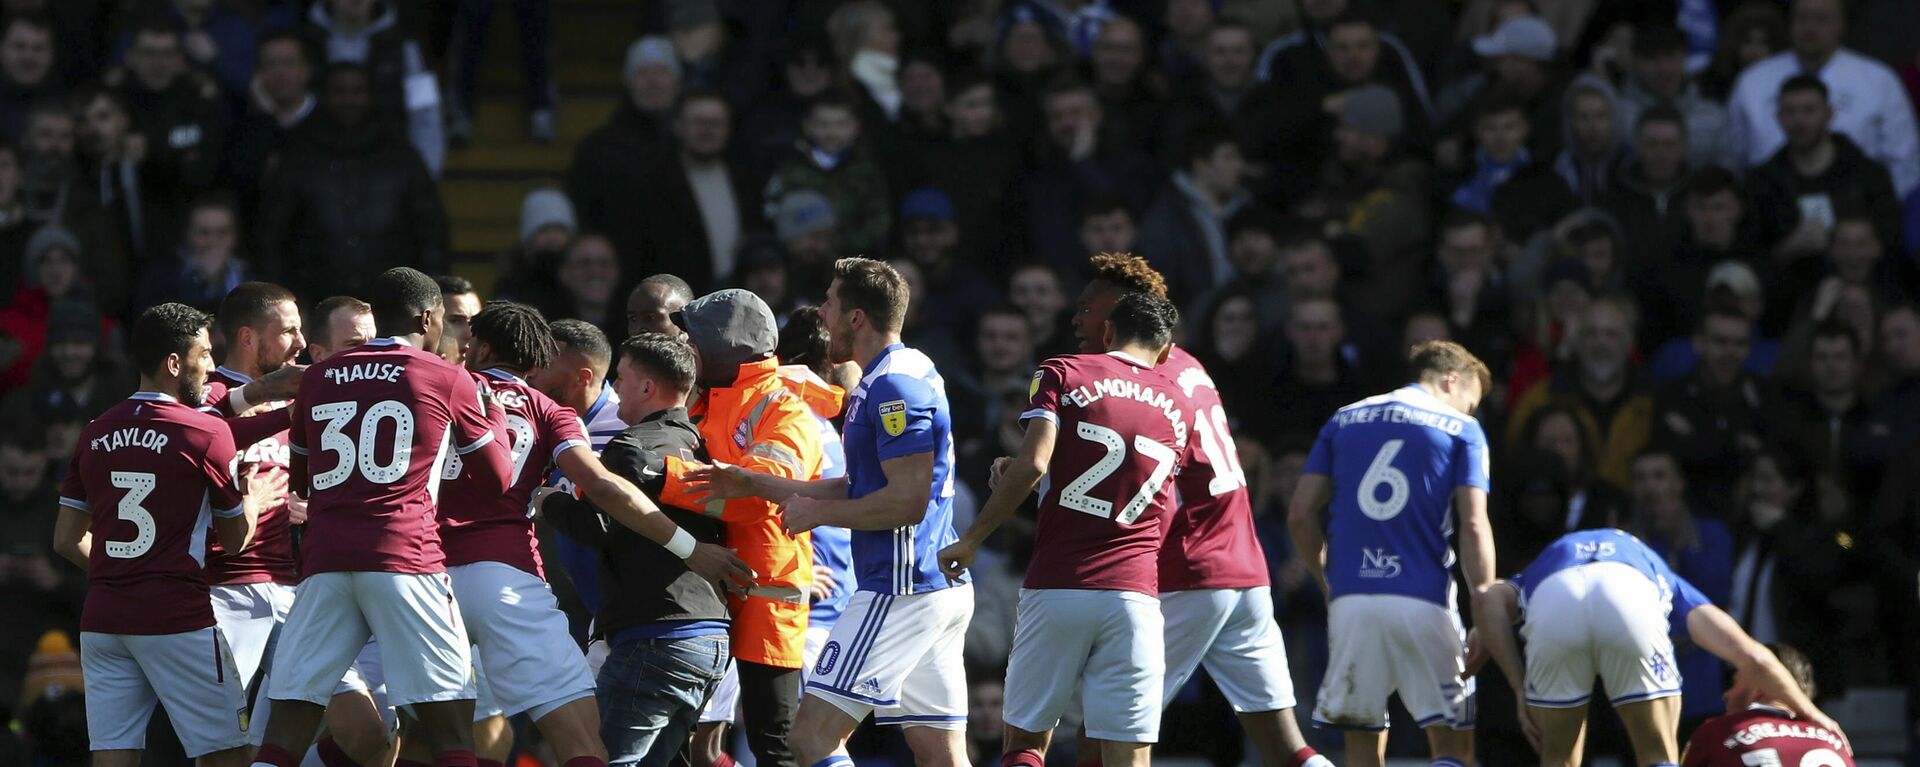 Aston Villa's Jack Grealish sits, nursing a sore head, after being punched by a Birmingham City fan at a game on 10 March 2019 - اسپوتنیک افغانستان  , 1920, 07.11.2021